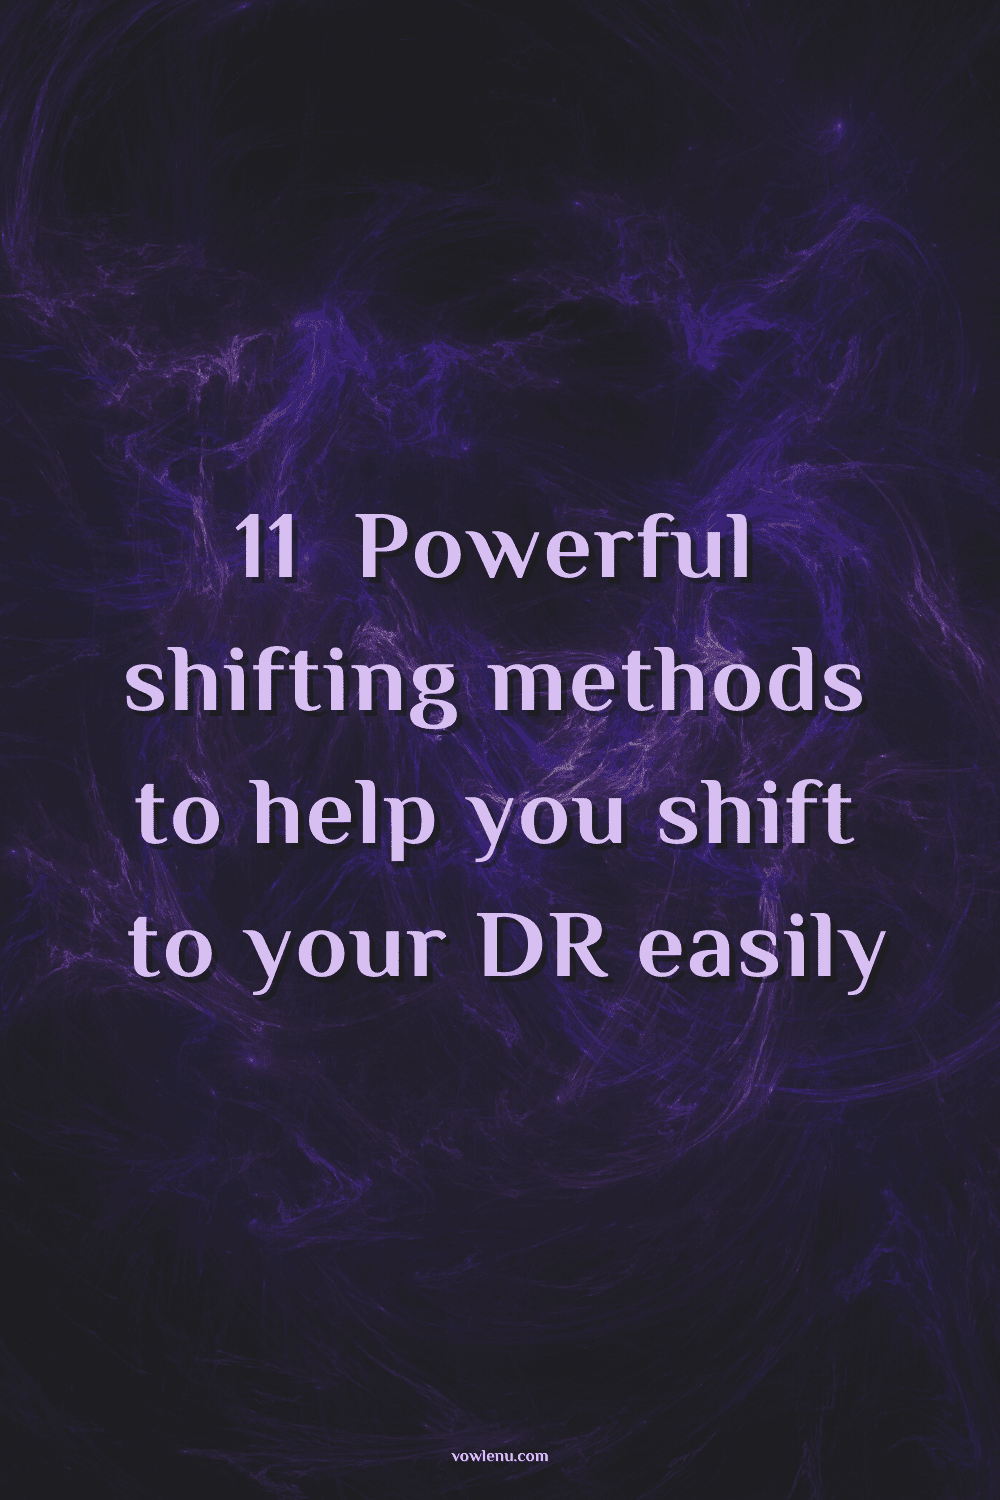 11 Powerful shifting methods to help you shift to your DR easily